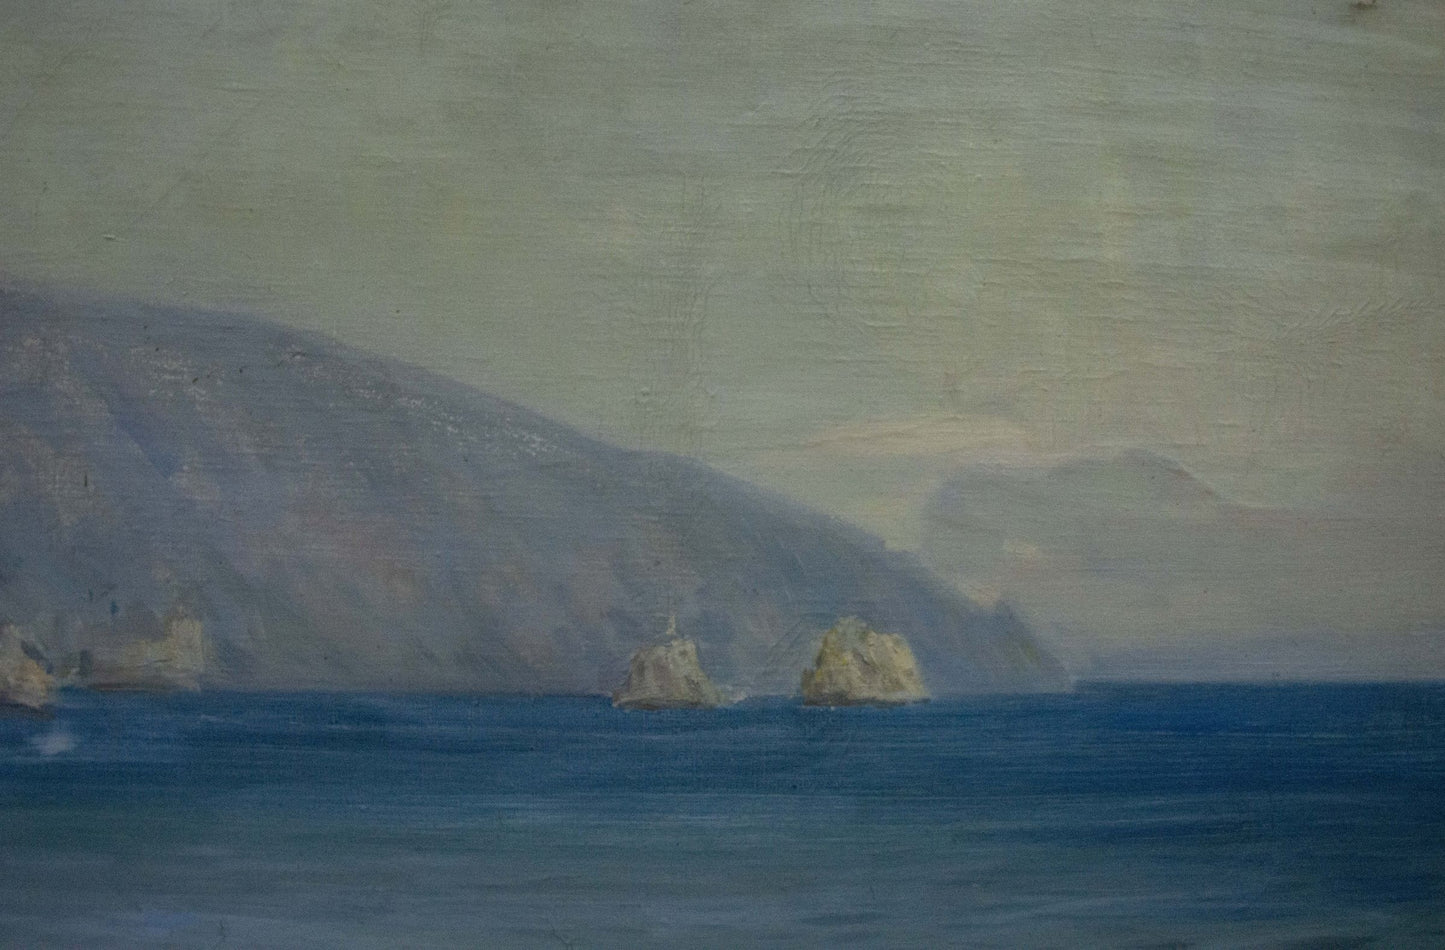 Yalta's allure brought to life in an oil painting by Daniil Ivanovich Bezugly